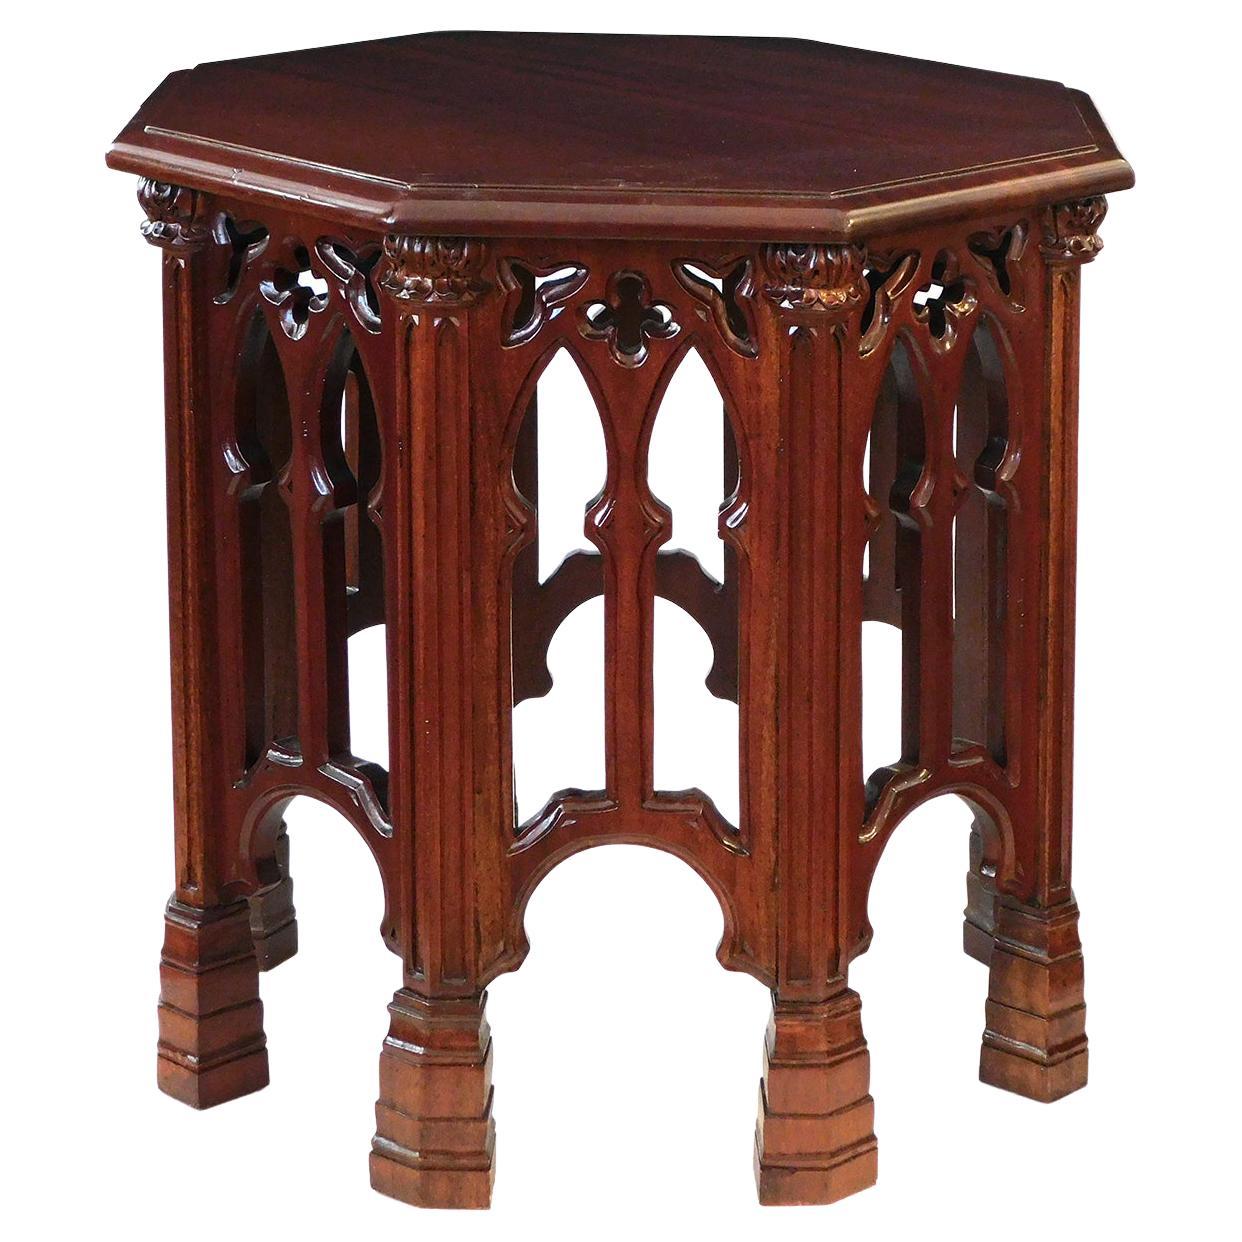 English Neo-Gothic Style Carved Solid Mahogany Octagonal Side / Drinks Table